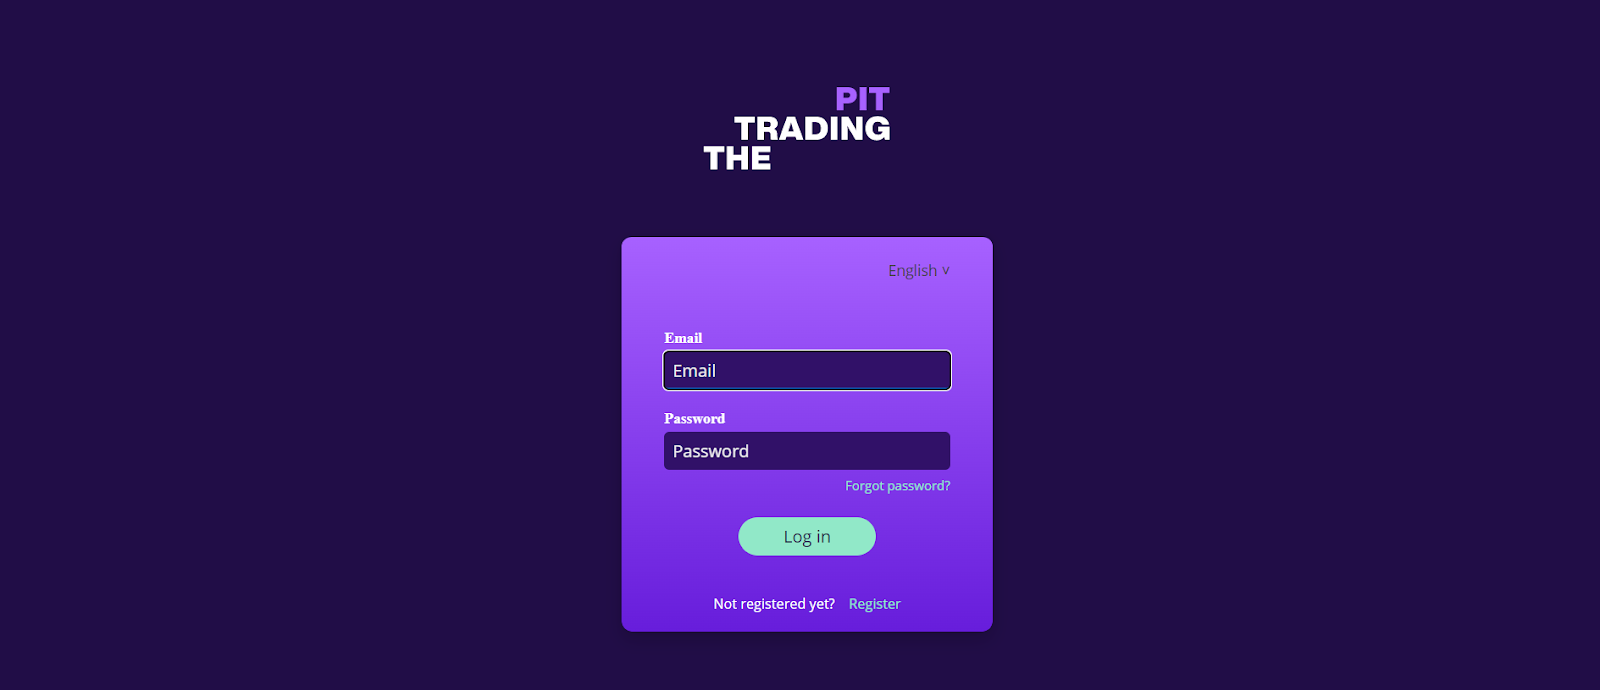 Confirming your email to register with The Trading Pit